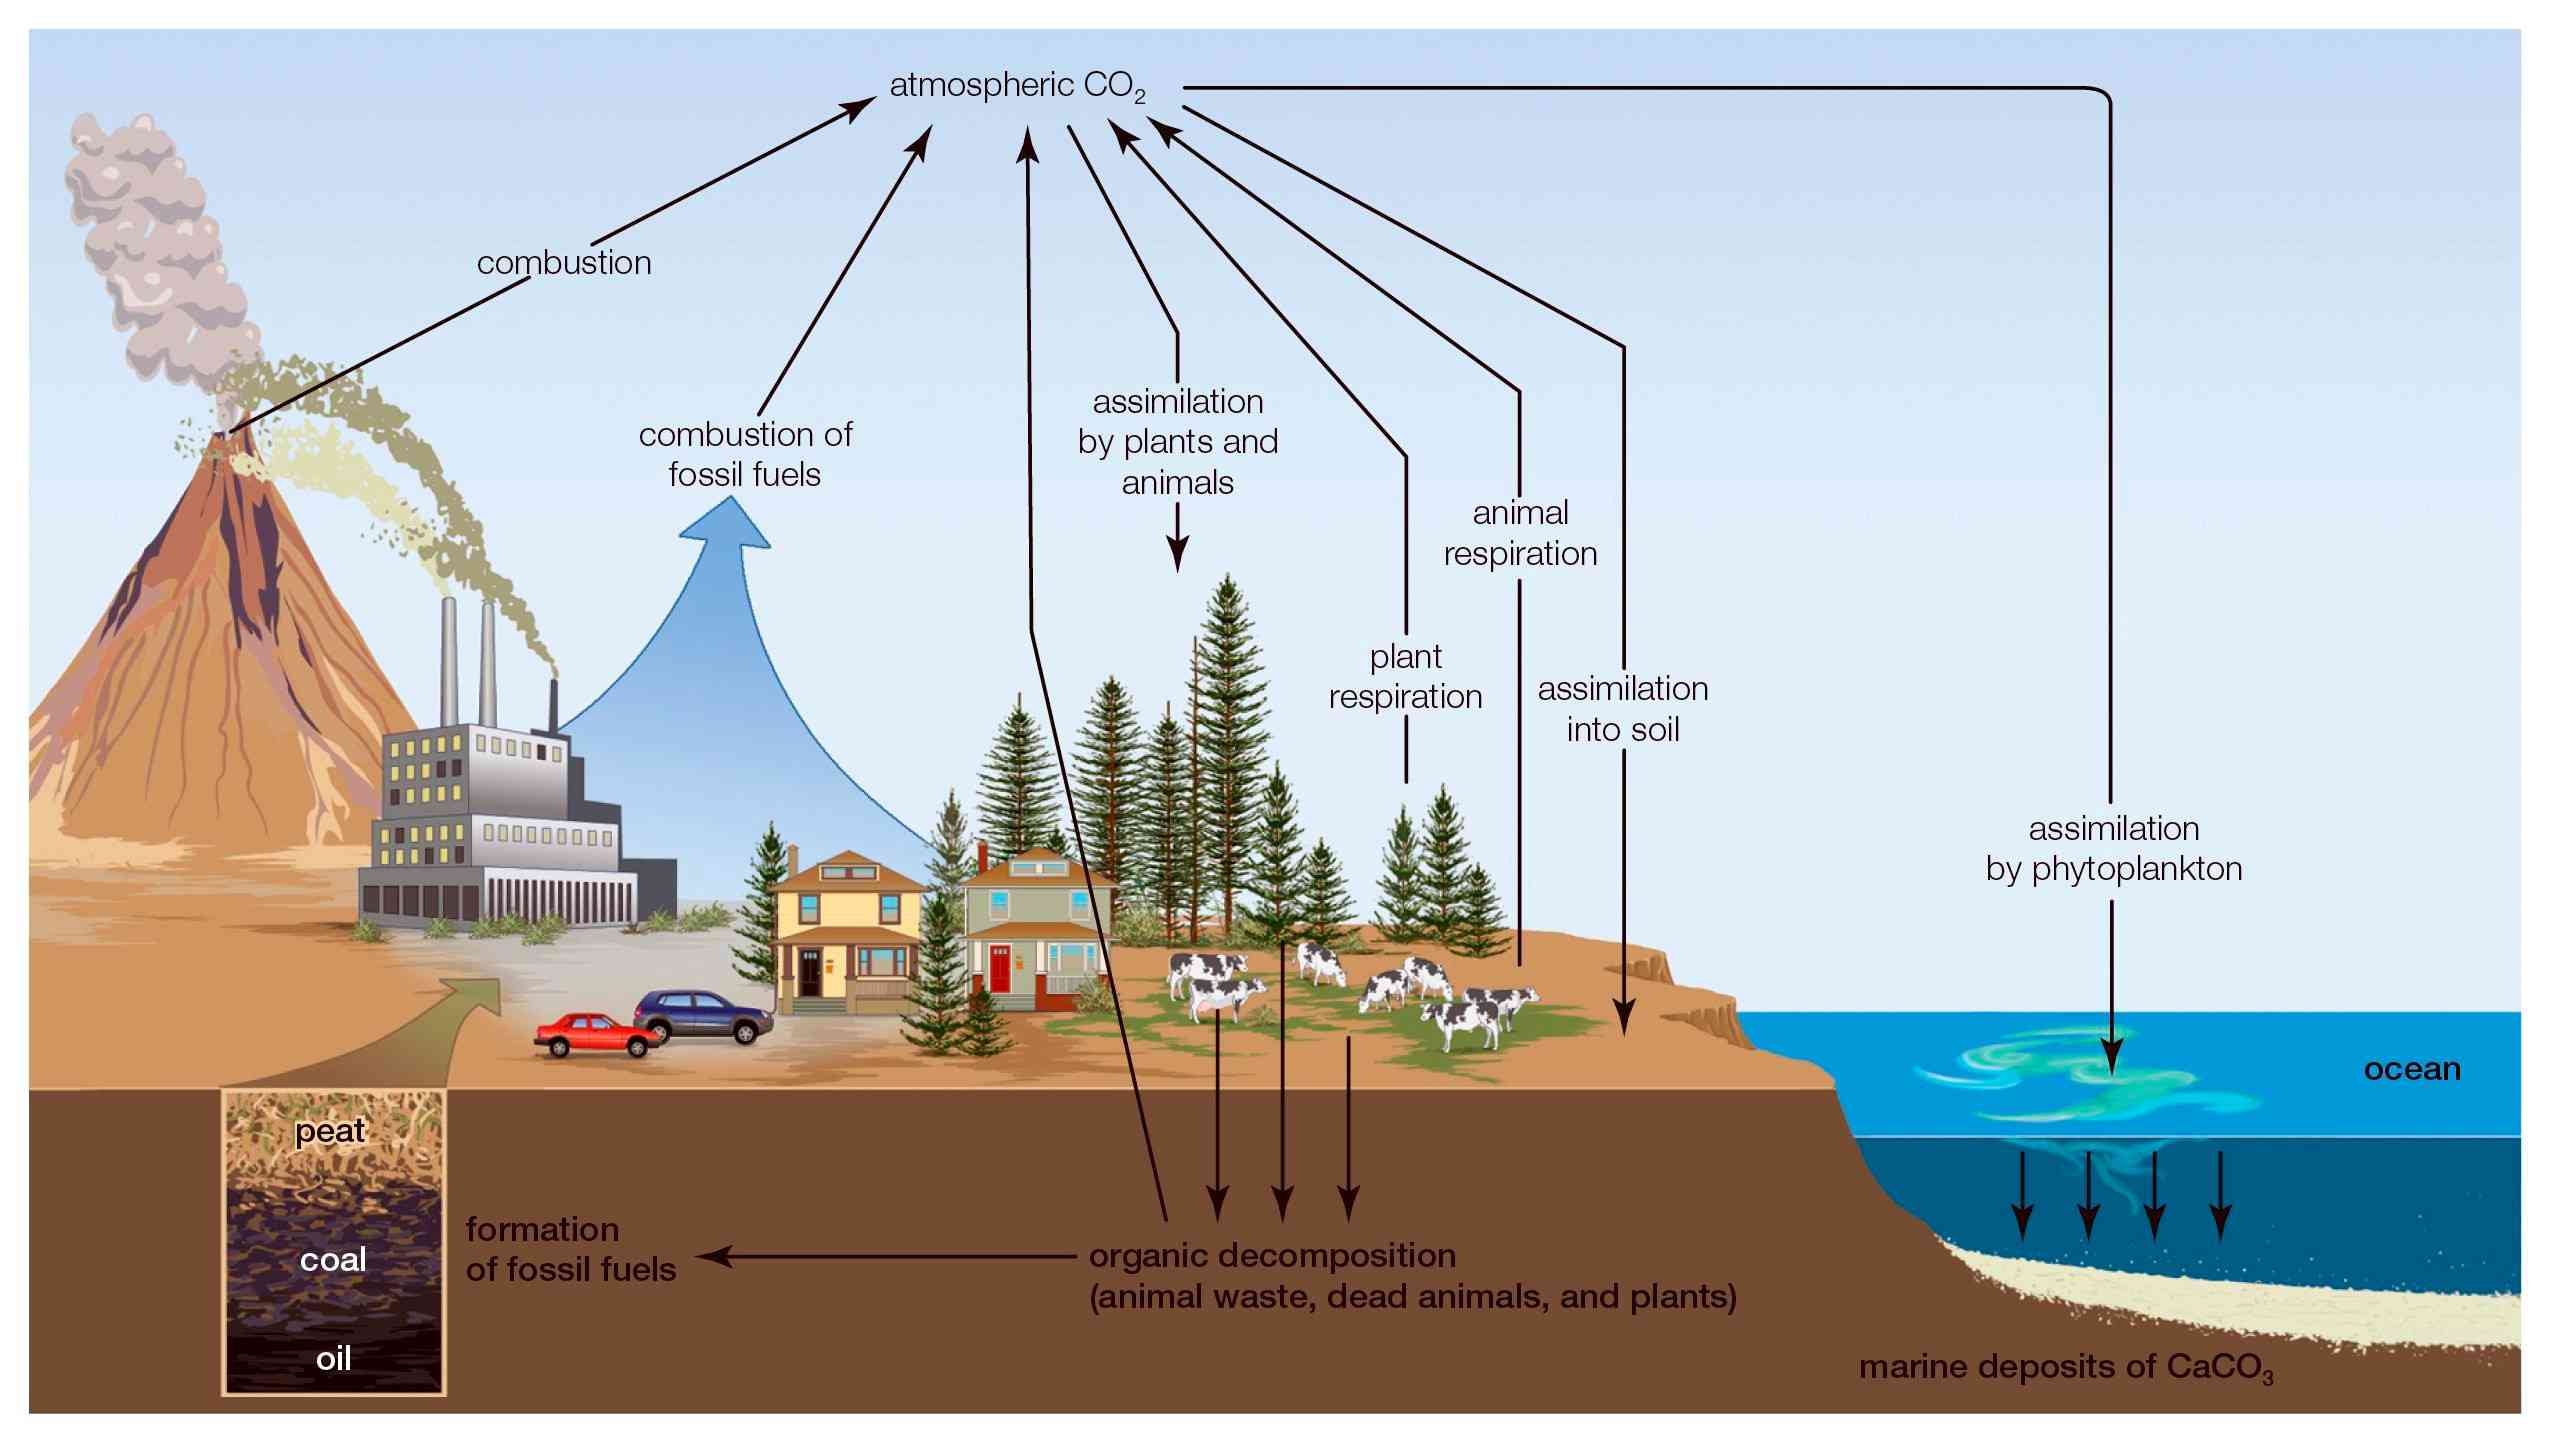 Carbon cycle describes the system whereby atmospheric carbon is sequestered in soil, plantlife, and the ocean